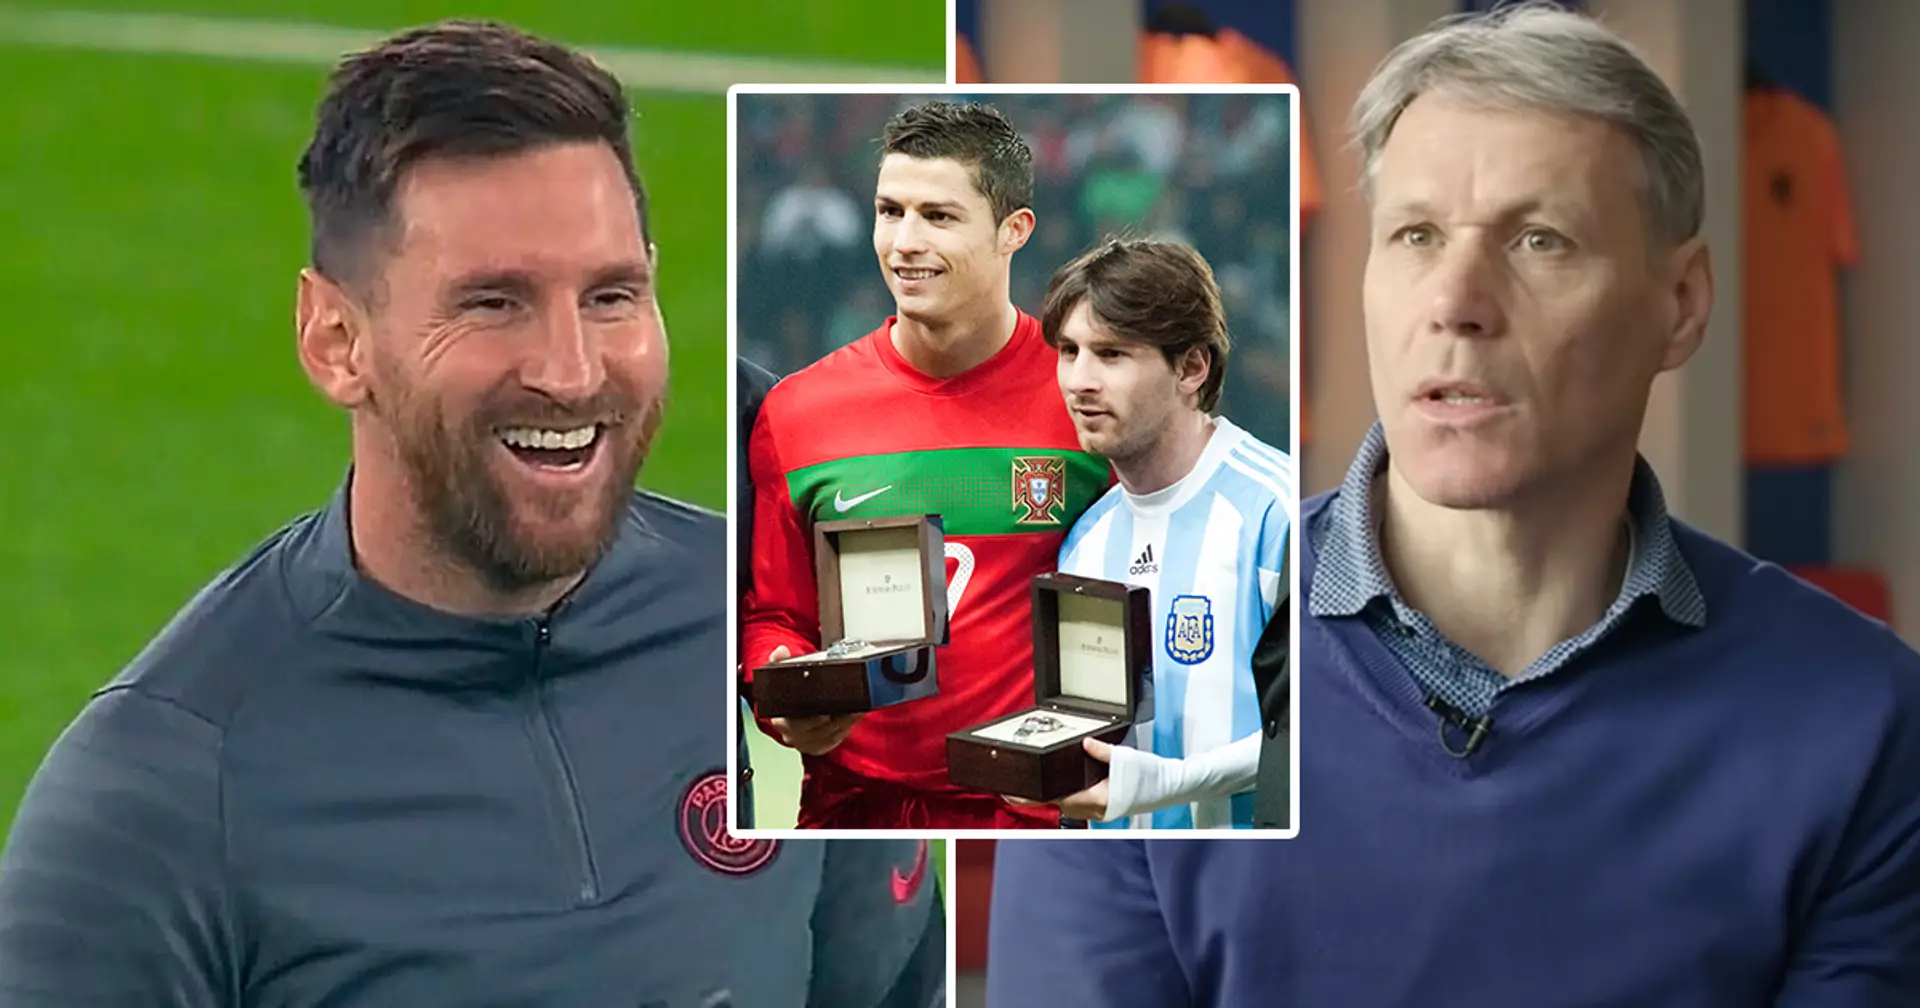 Van Basten: 'People who think Ronaldo is better than Messi know nothing about football'